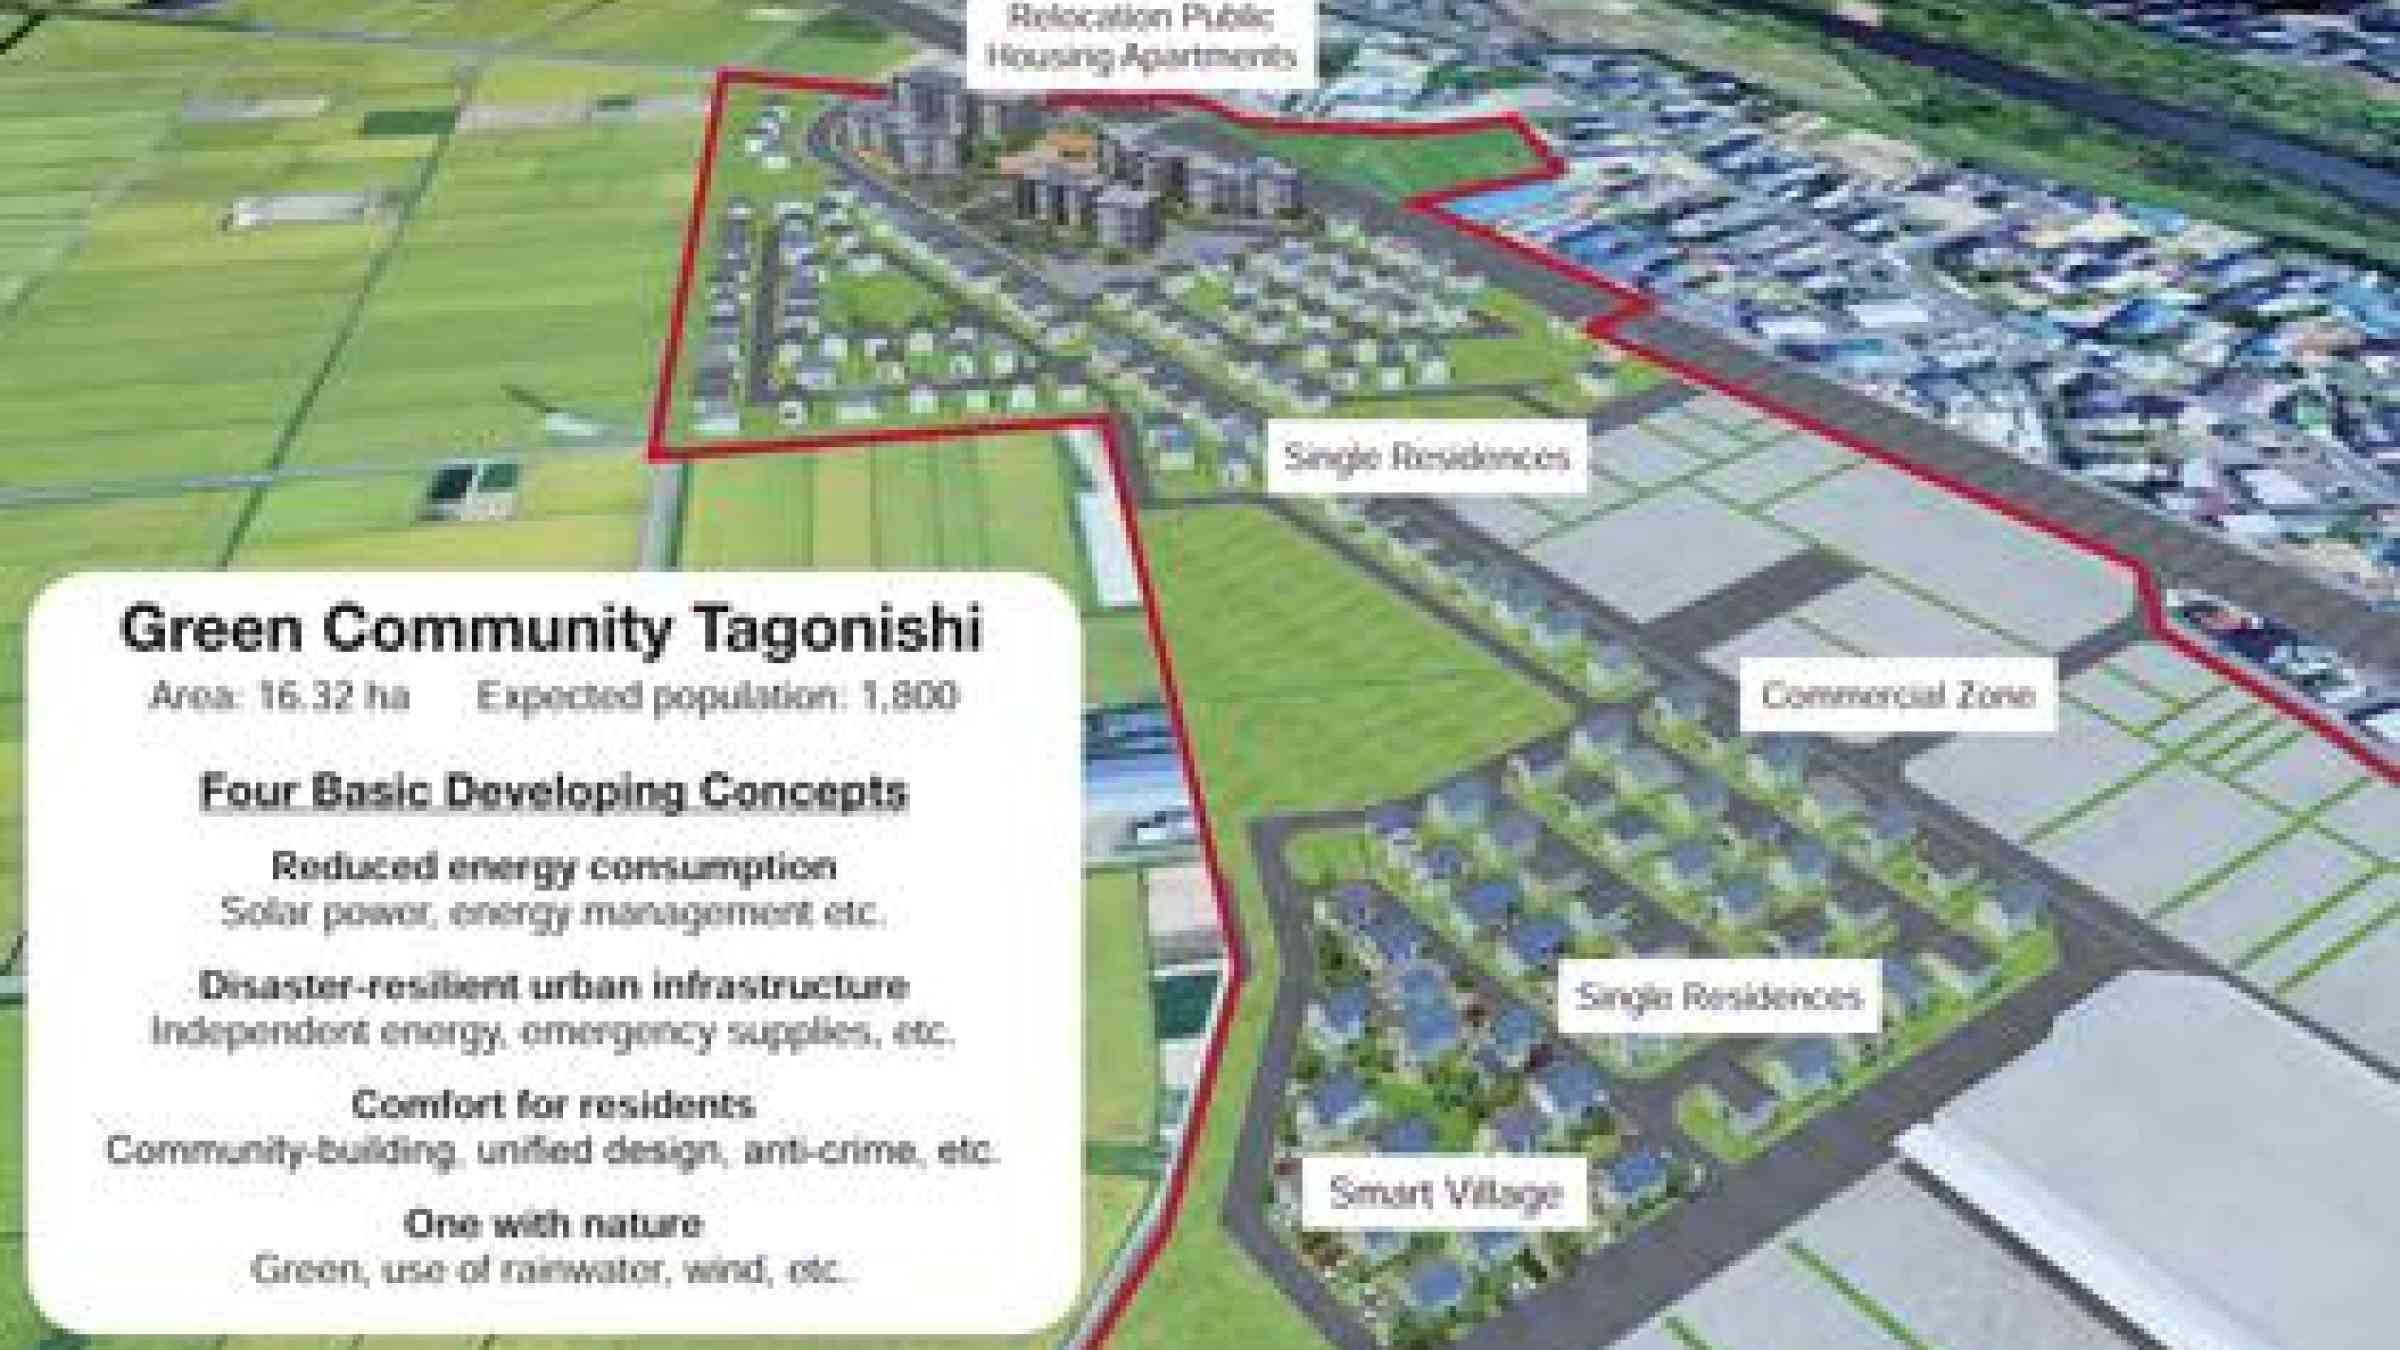 Overview of Green Community Tagonishi, a project by Kokusai Kogyo to build and develop a disaster resilient neighbourhood.